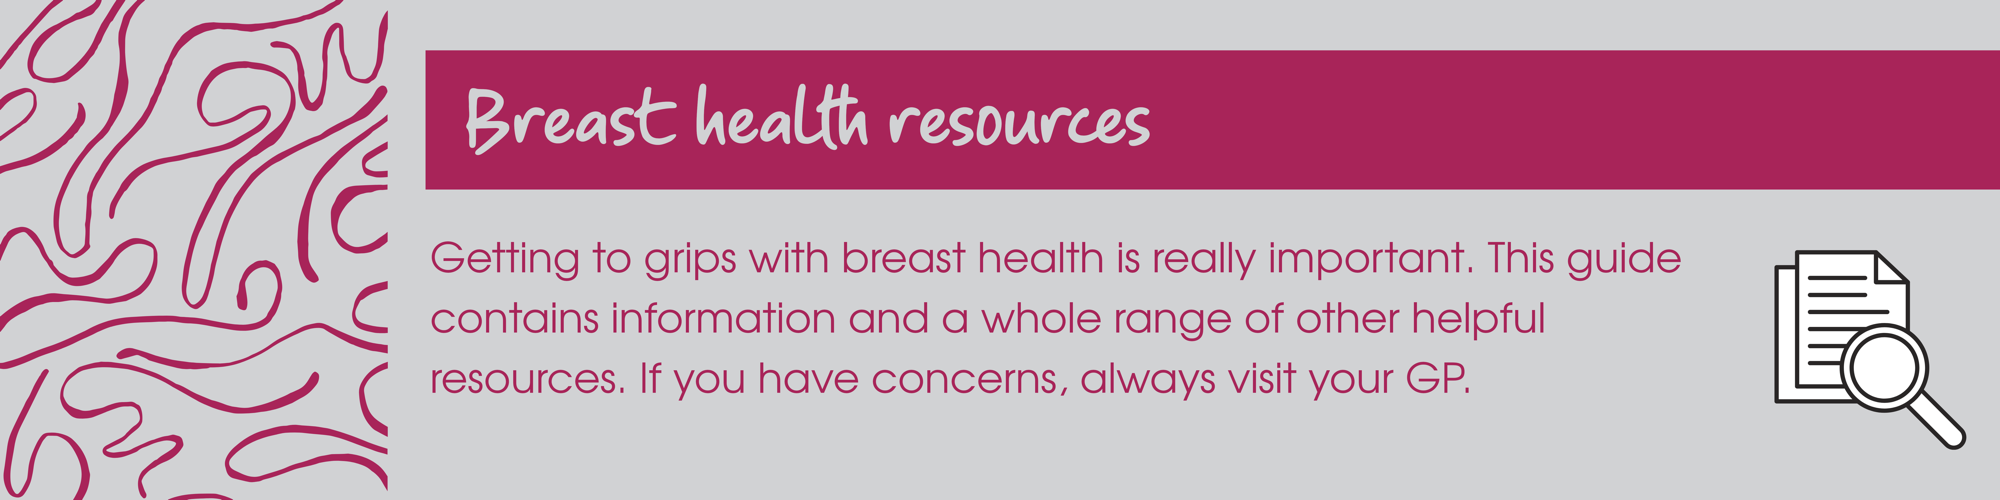 Breast health resources 